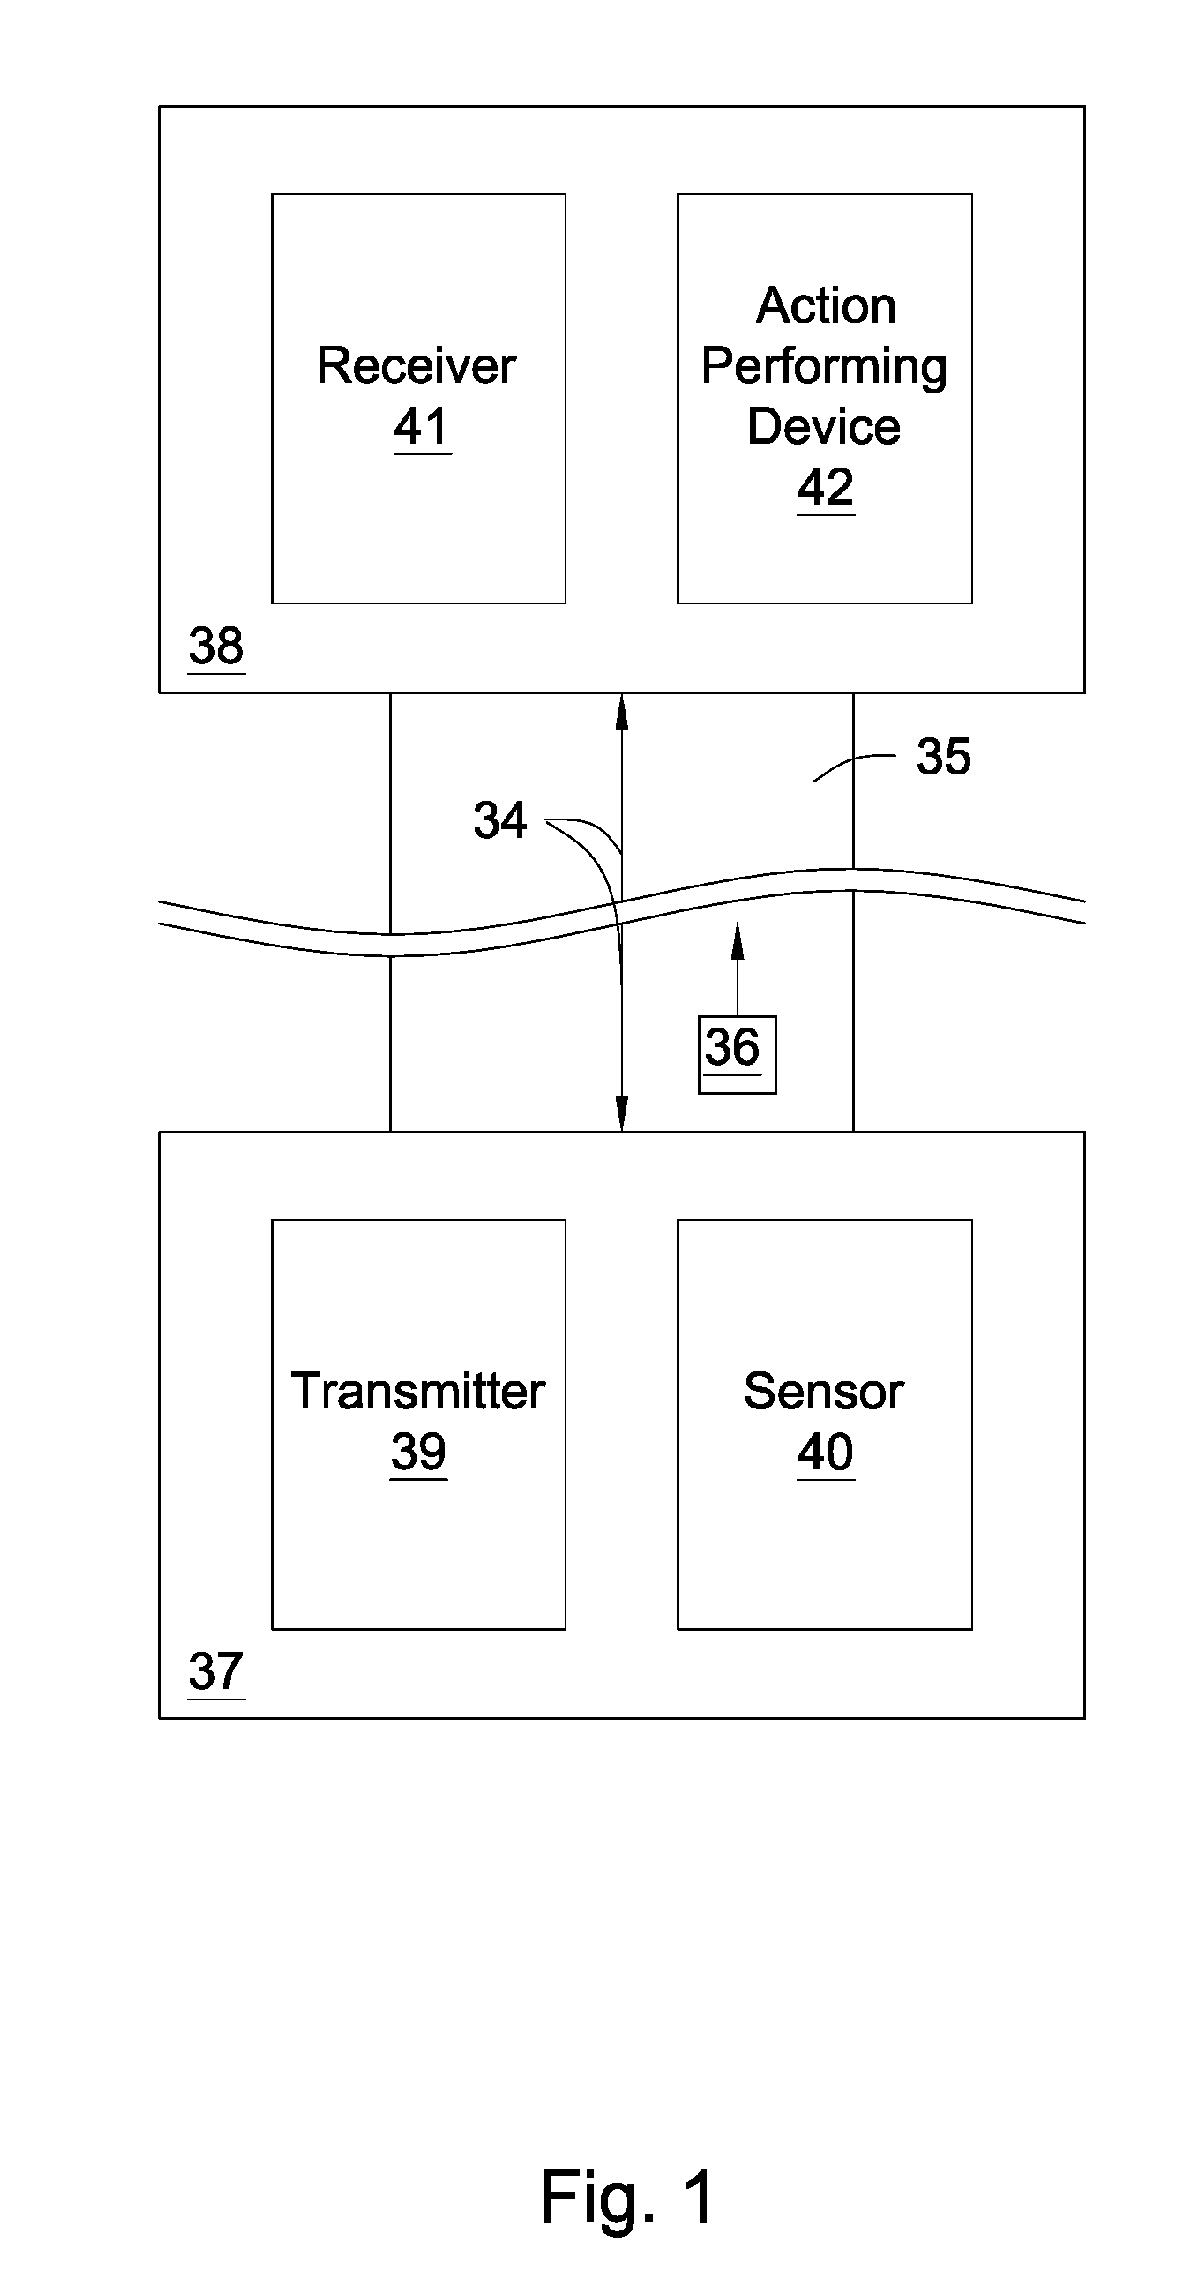 Apparatus for Responding to an Anomalous Change in Downhole Pressure